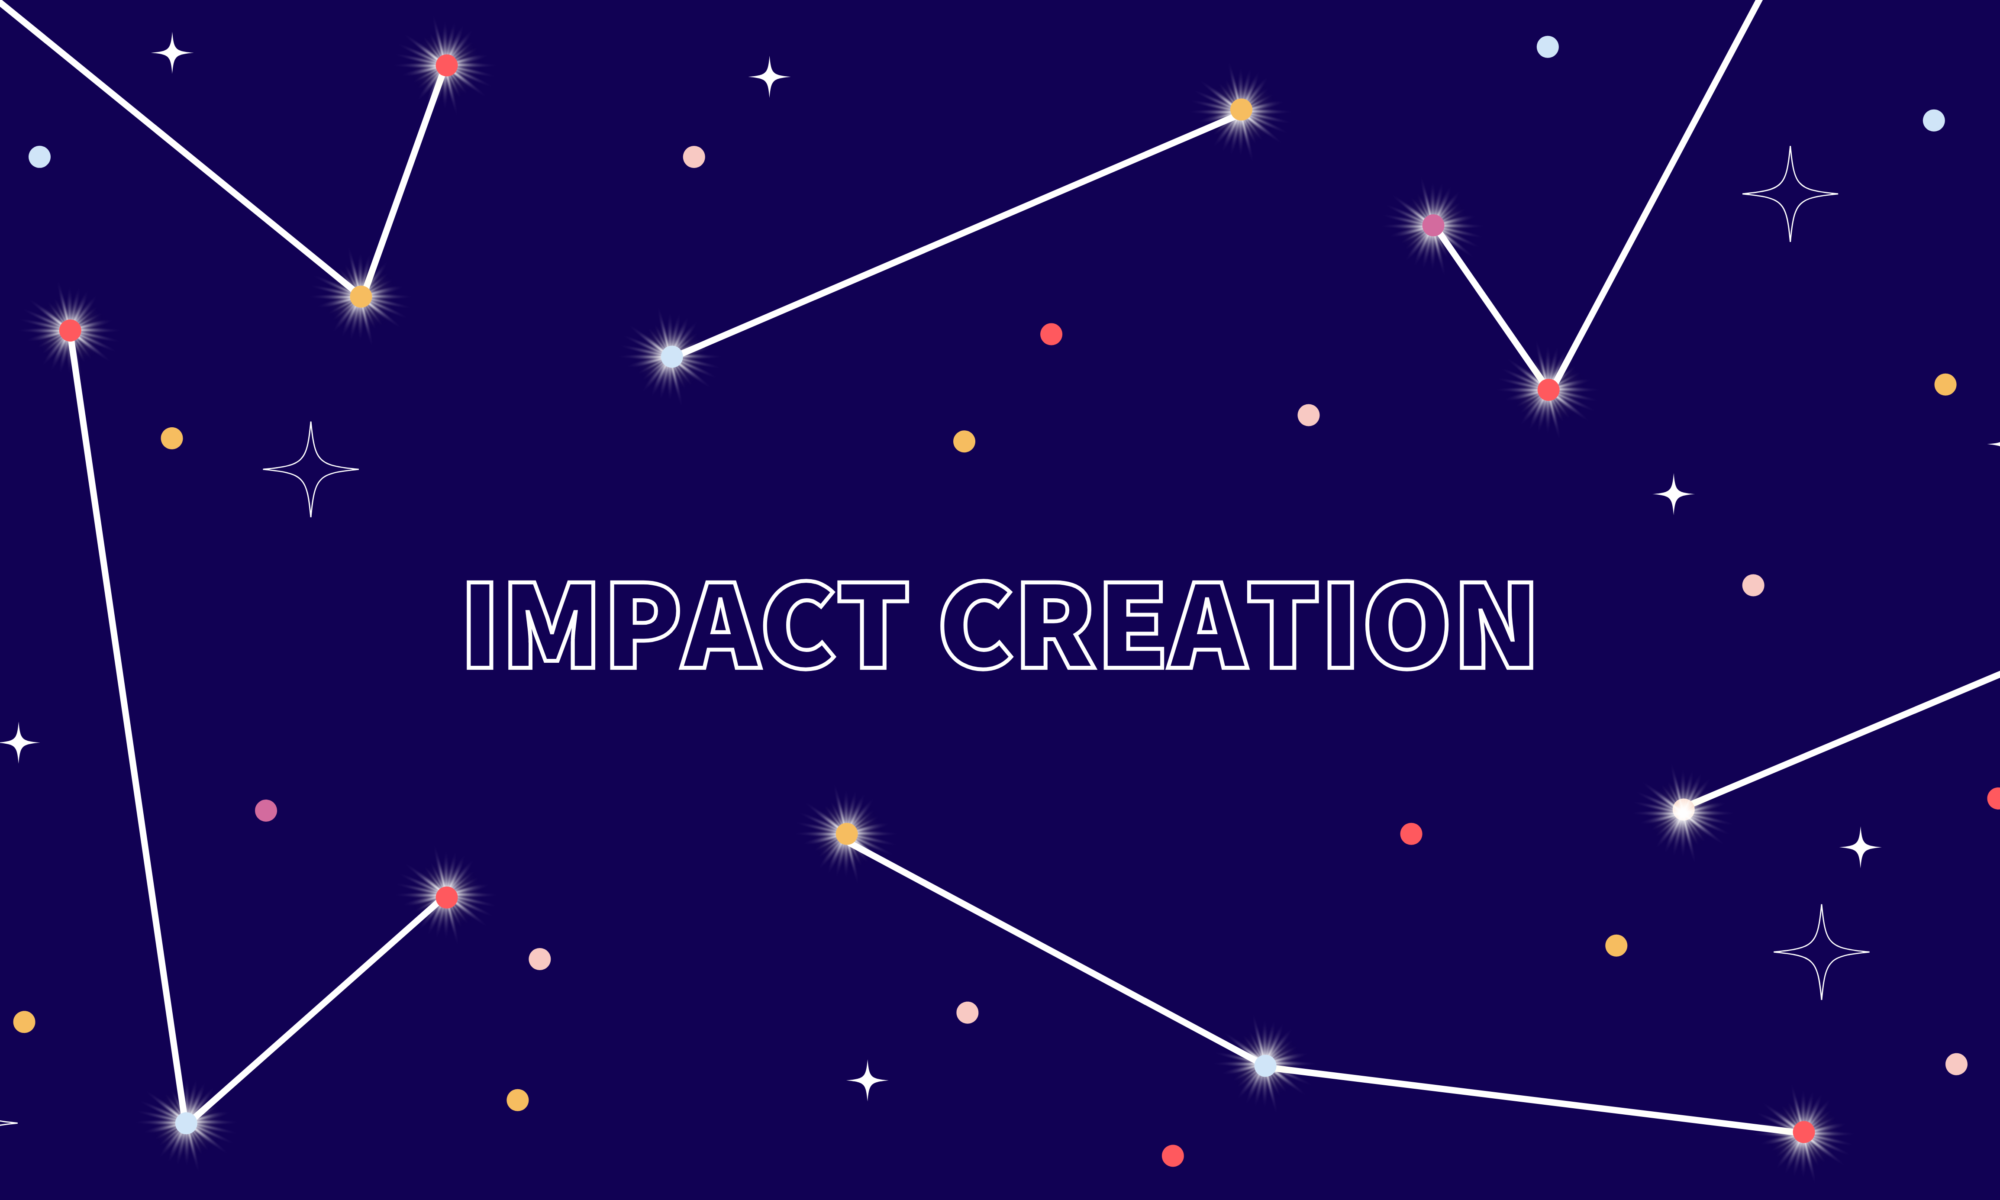 Graphic image of a starry night sky with colourful stars. The image has text which reads: IMPACT CREATION